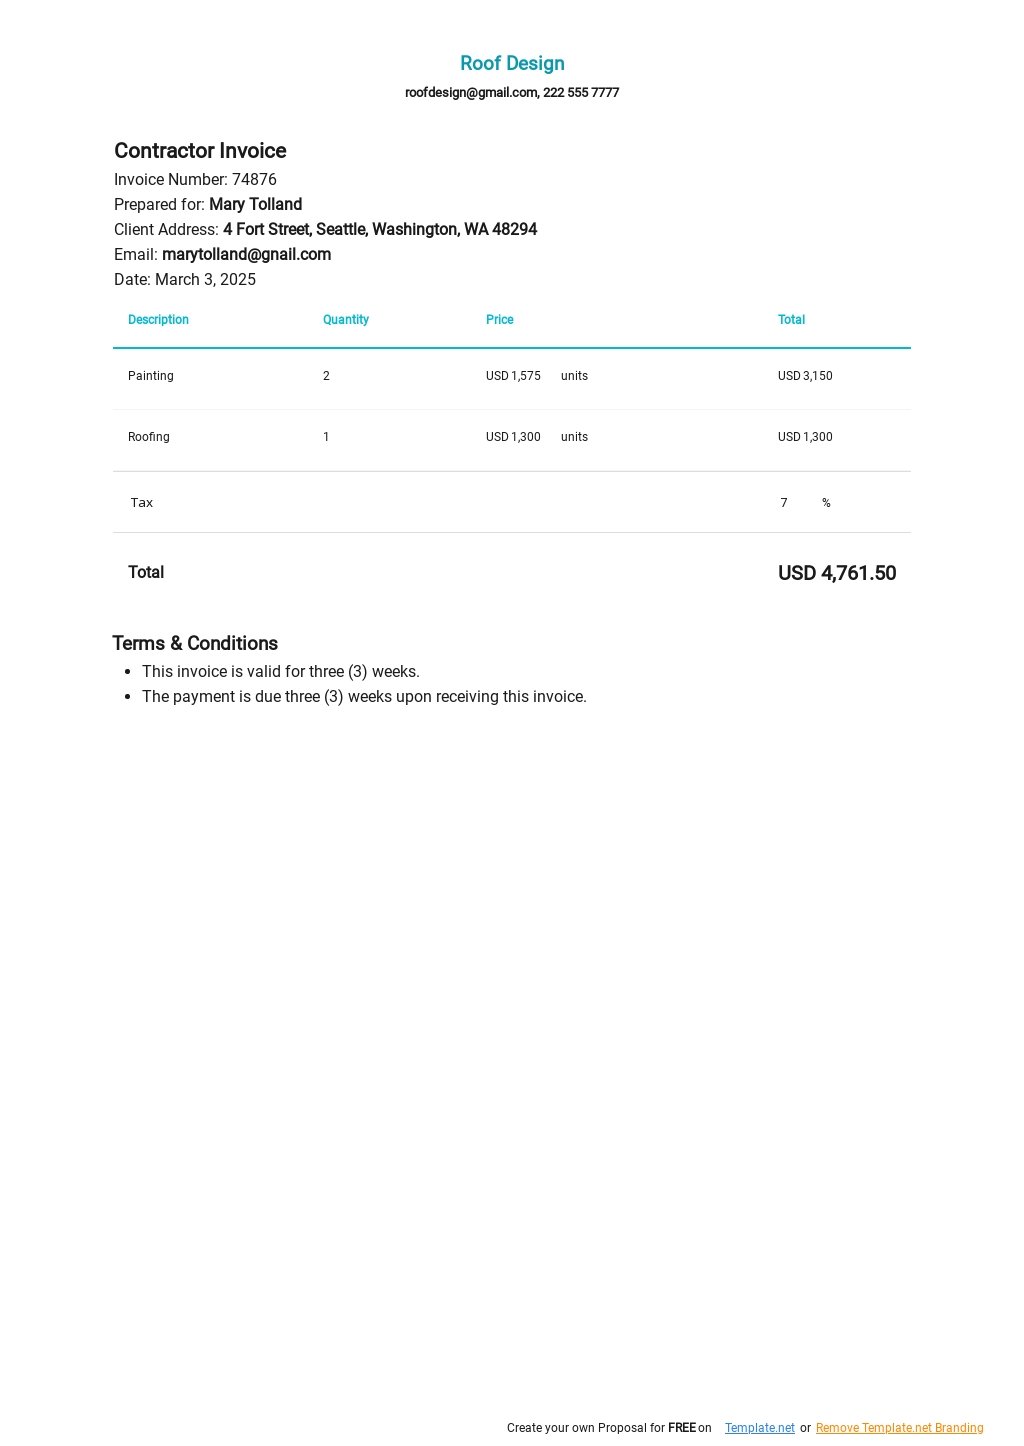 Blank Contractor Invoice Template.jpe